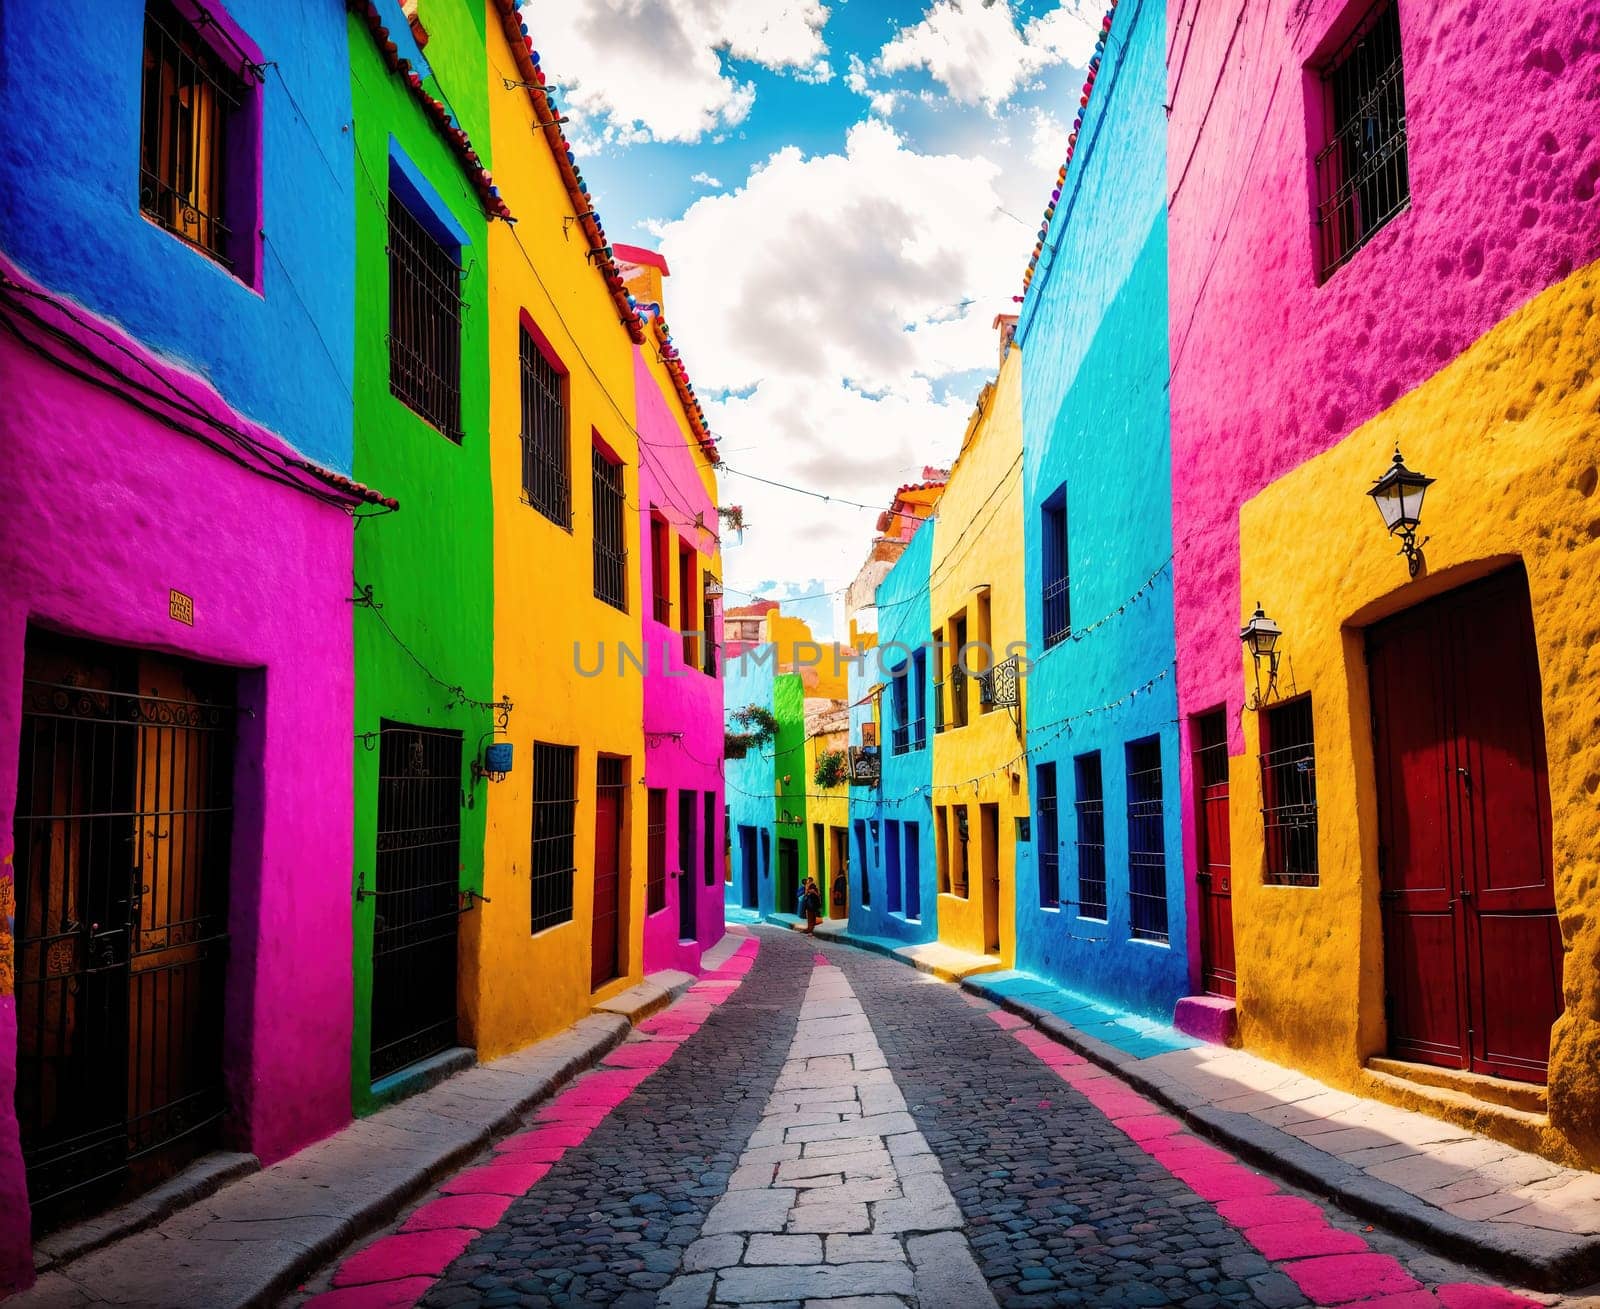 A colorful street lined with brightly painted buildings. by creart